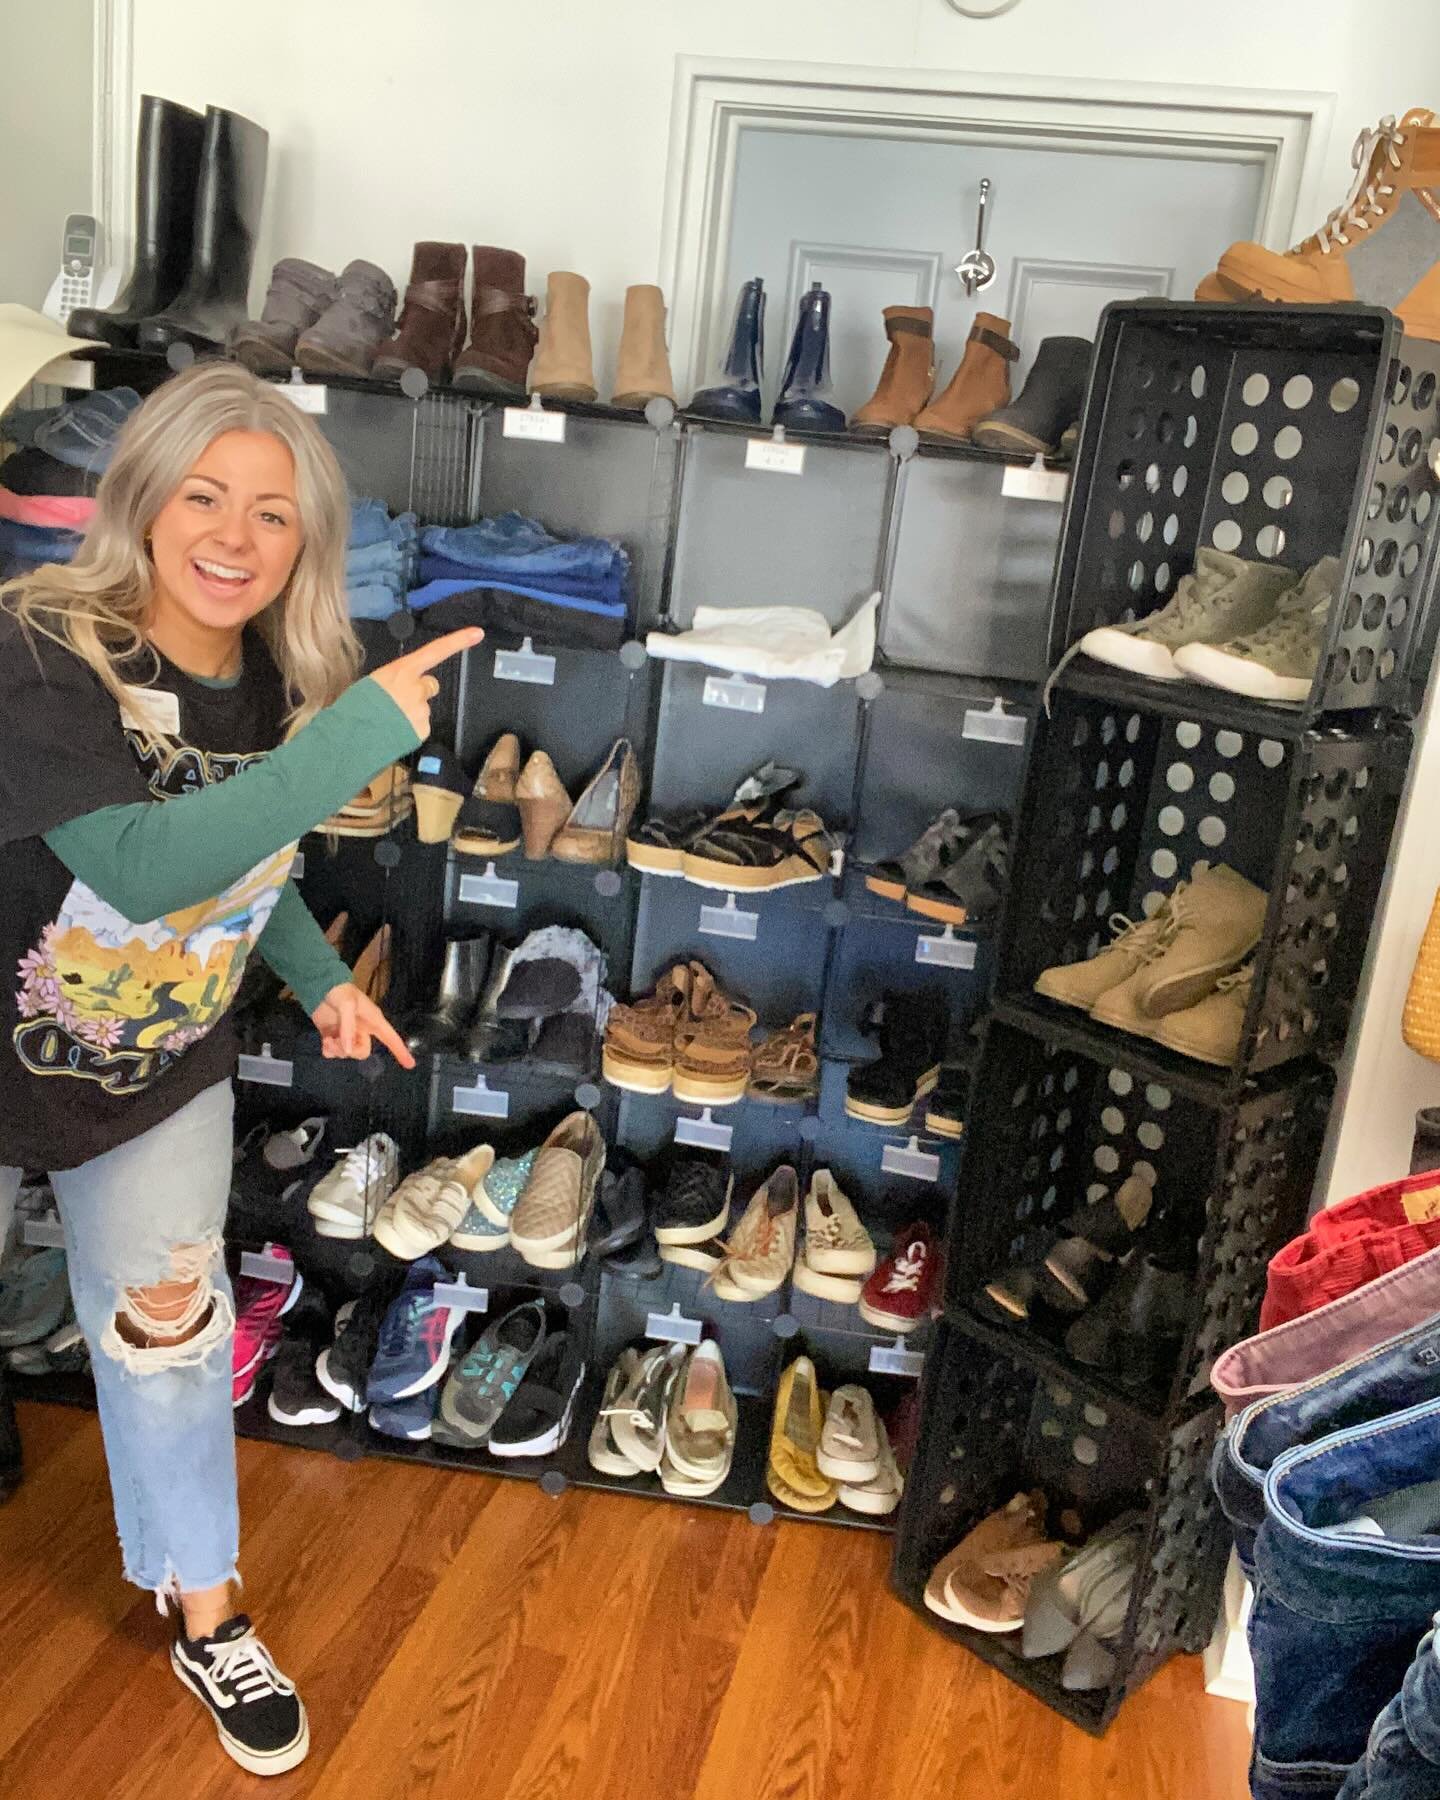 Come check out our new shoe wall!!! 👟 👠 👞 

Our new layout allows us to get so much more product out so you can shop more of our quality items at incredible prices! 🤗

🛍️ P4G Thrift
506 N Main St. Mount Vernon

.
.
.
.

@place4grace 
@p4g_thrift